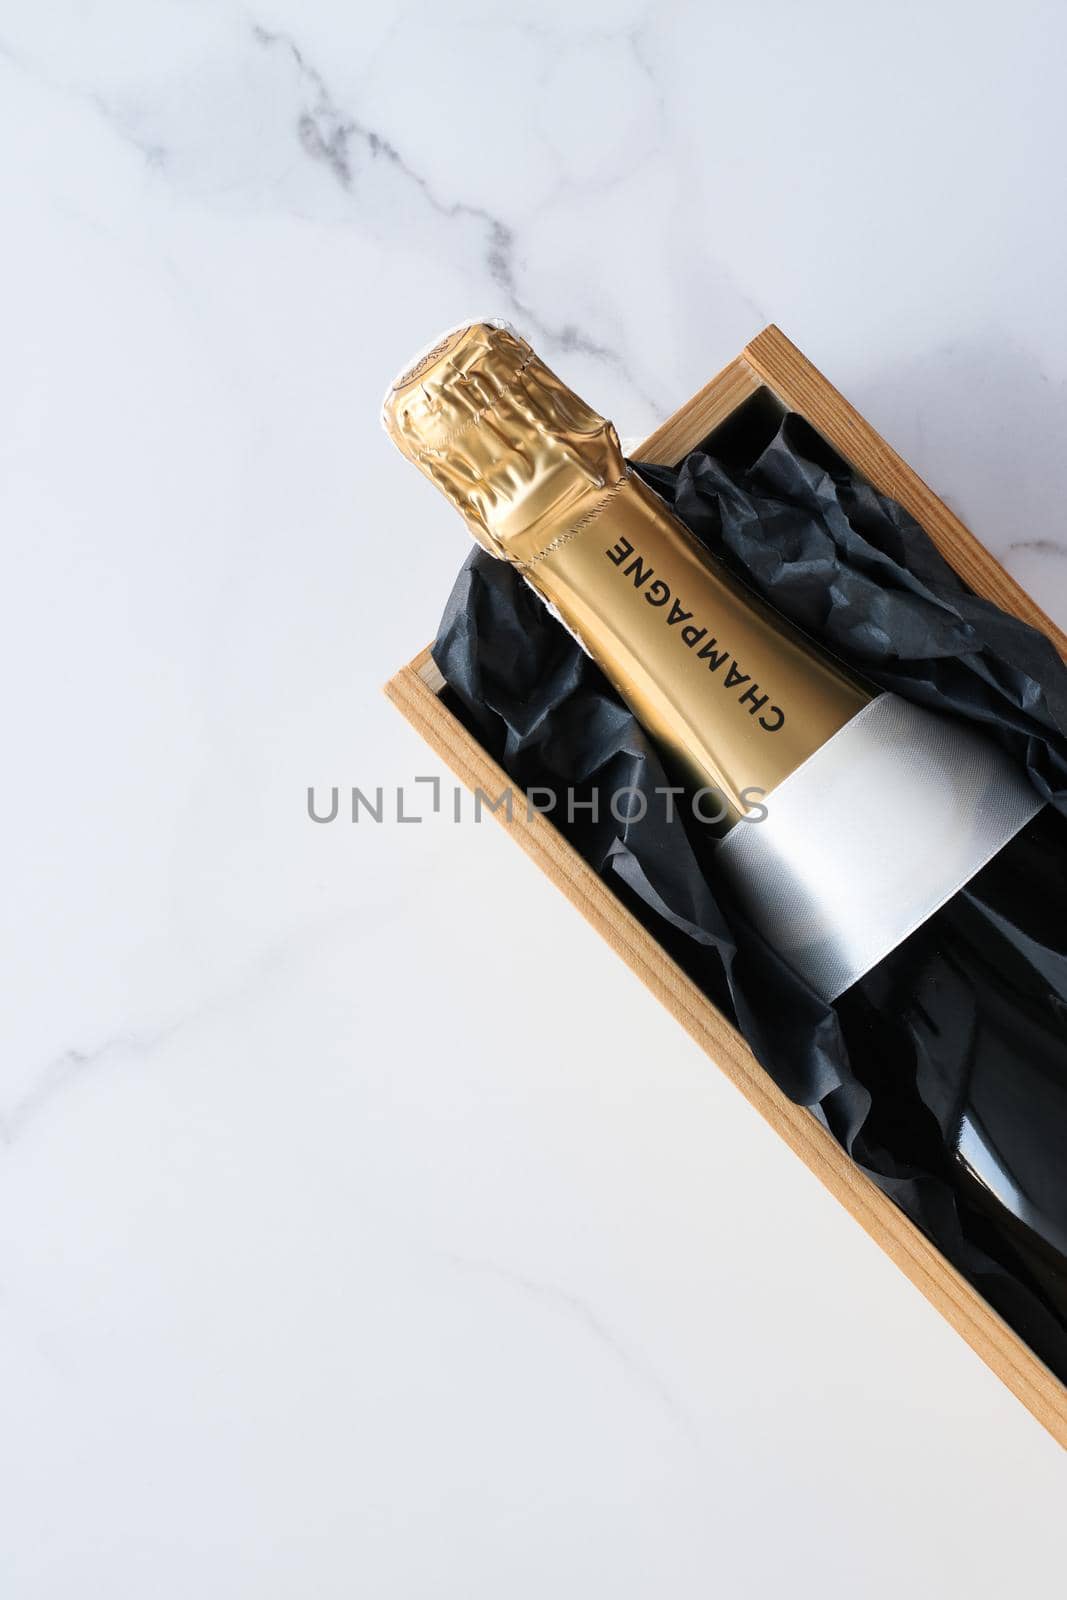 A champagne bottle and a gift box on marble by Anneleven